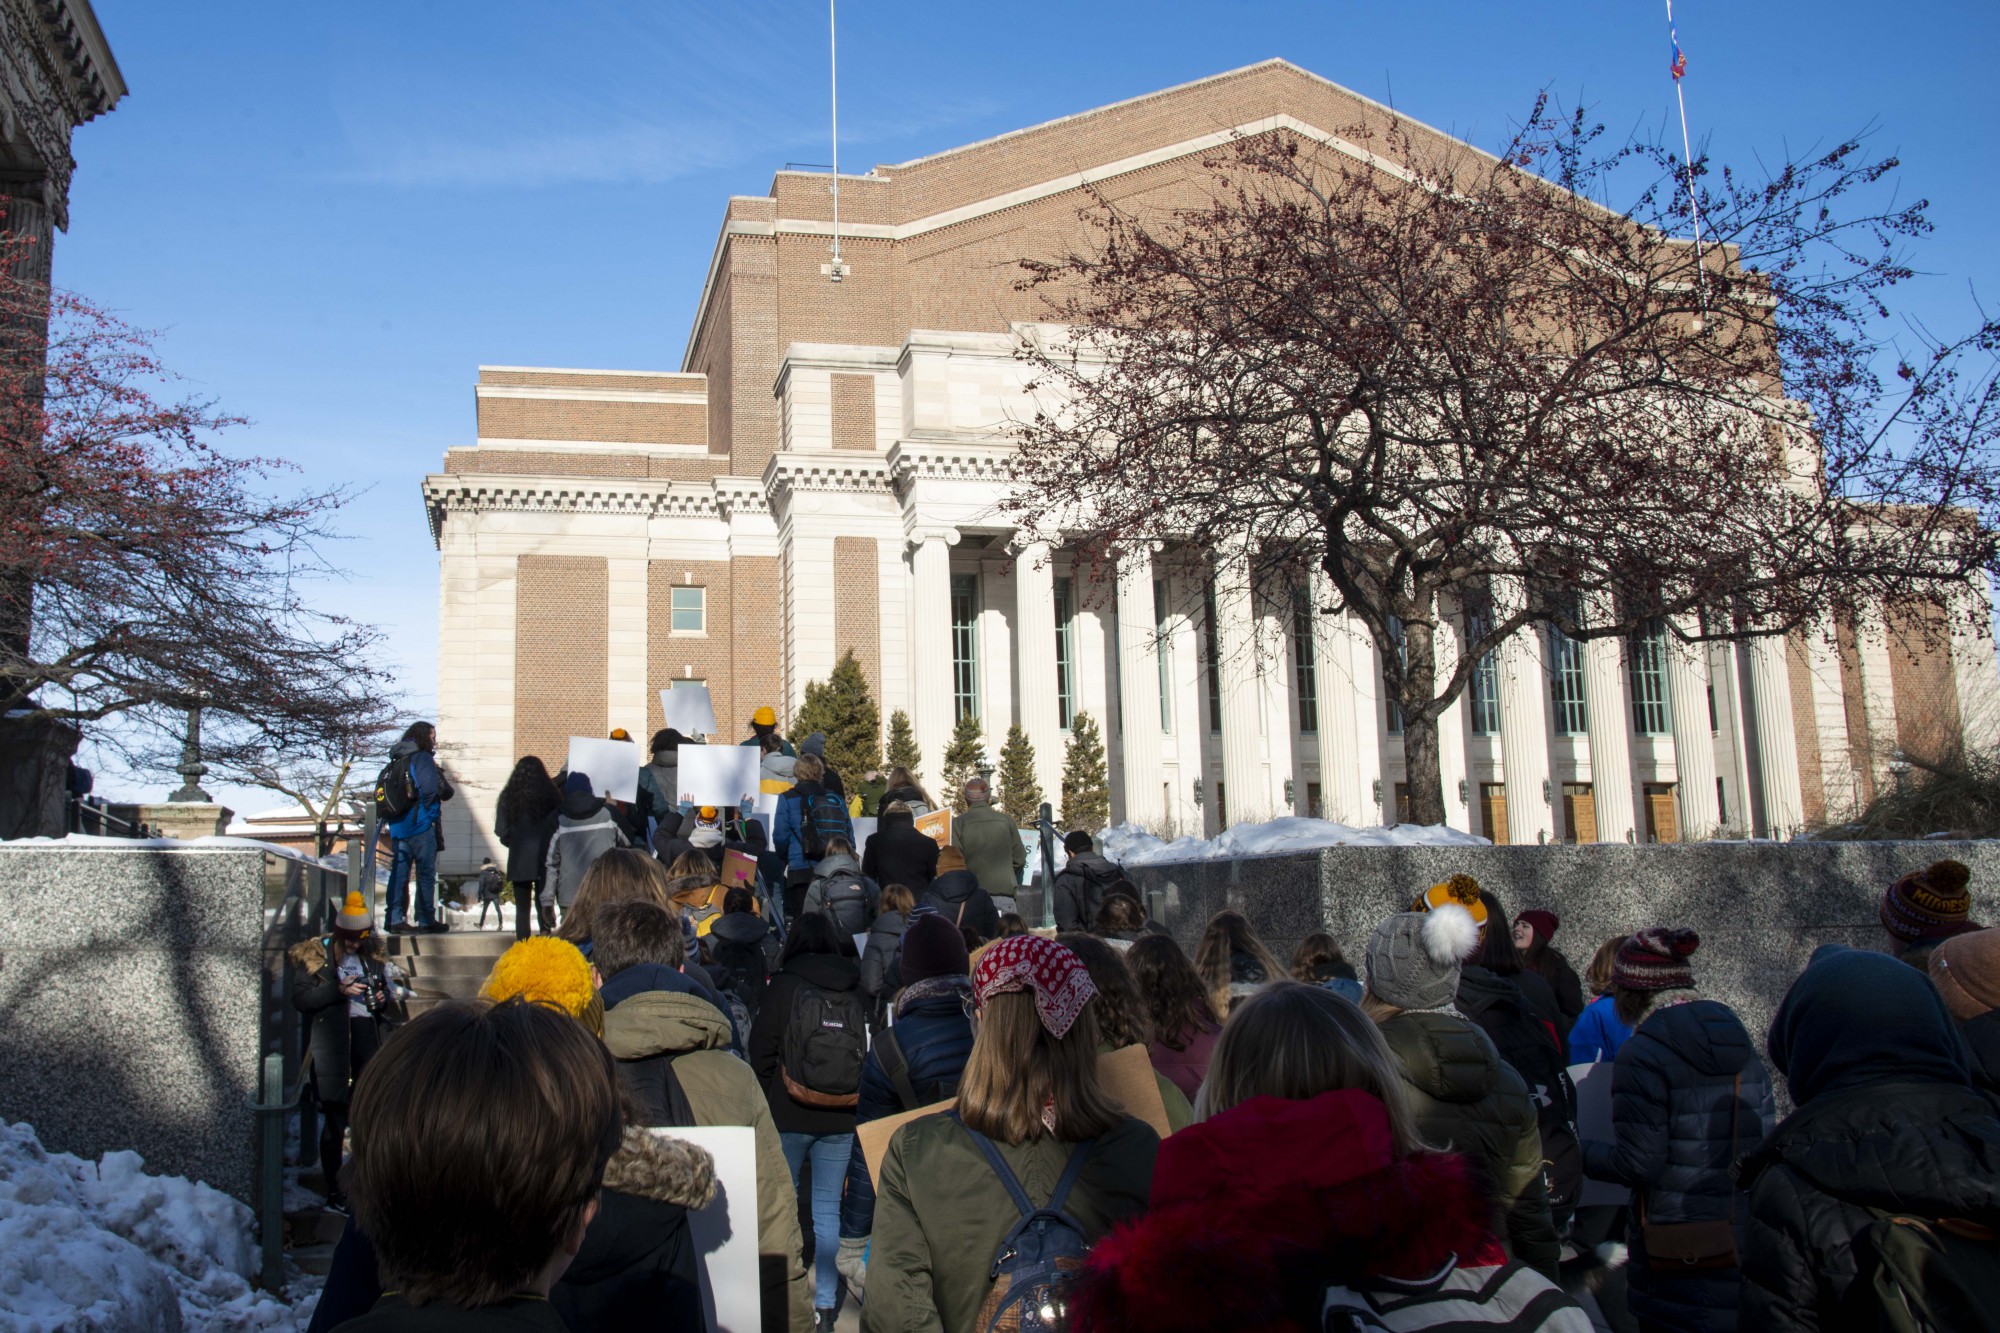 Students and faculty march towards Morrill Hall as part of the UMN Climate Strike on Friday, Dec. 6. Those in attendance criticized the University’s policies on fossil fuel usage.